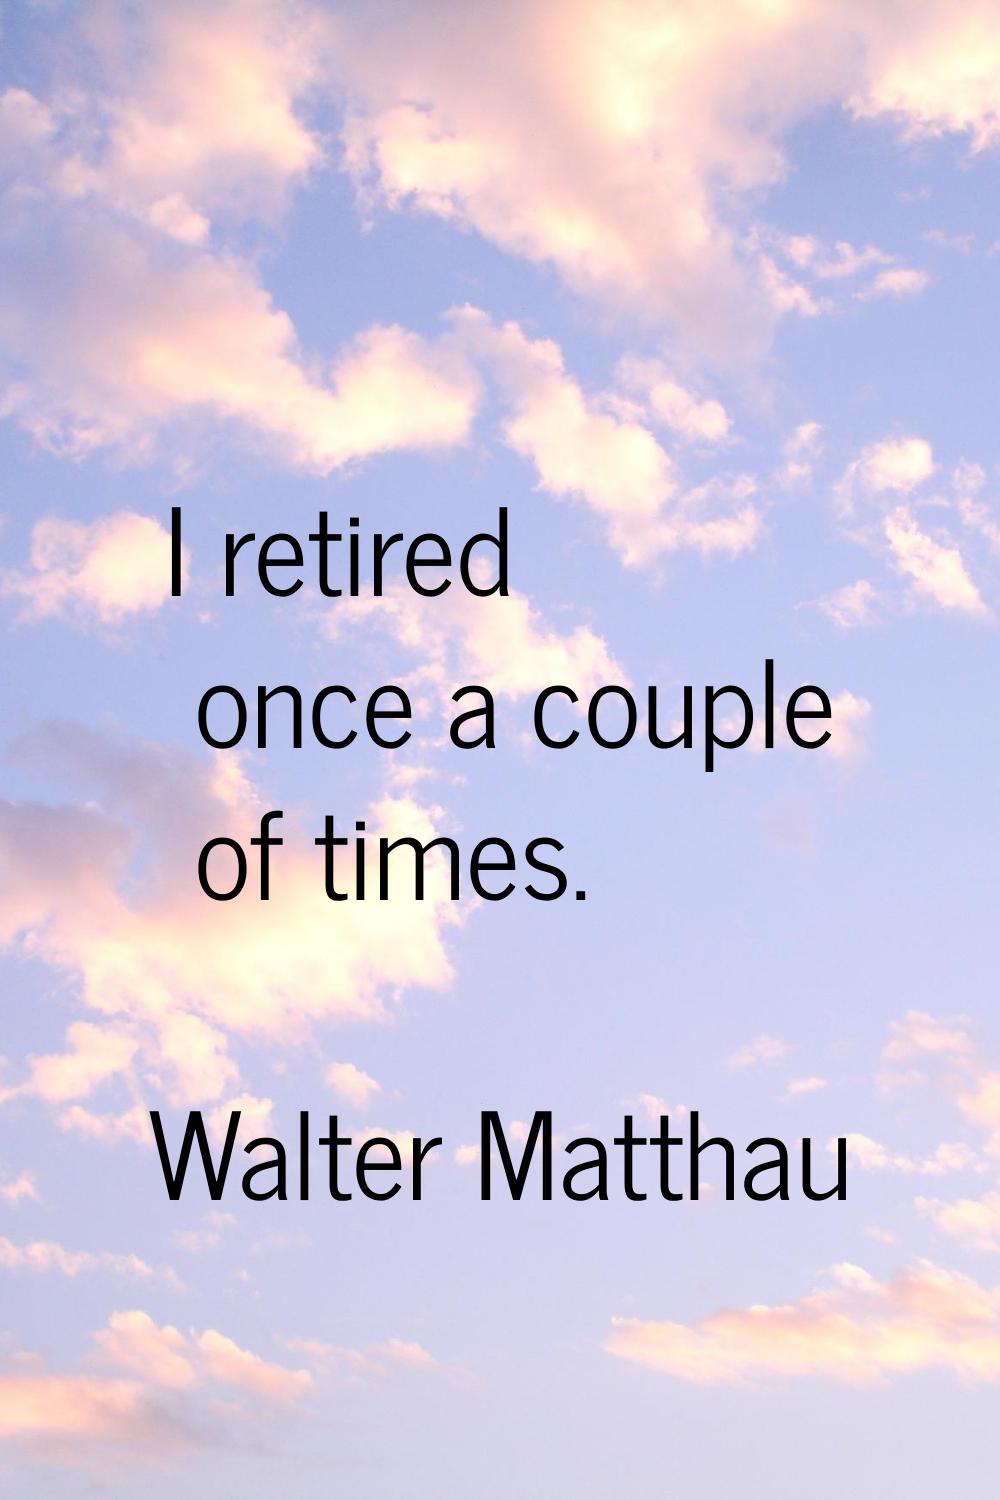 I retired once a couple of times.